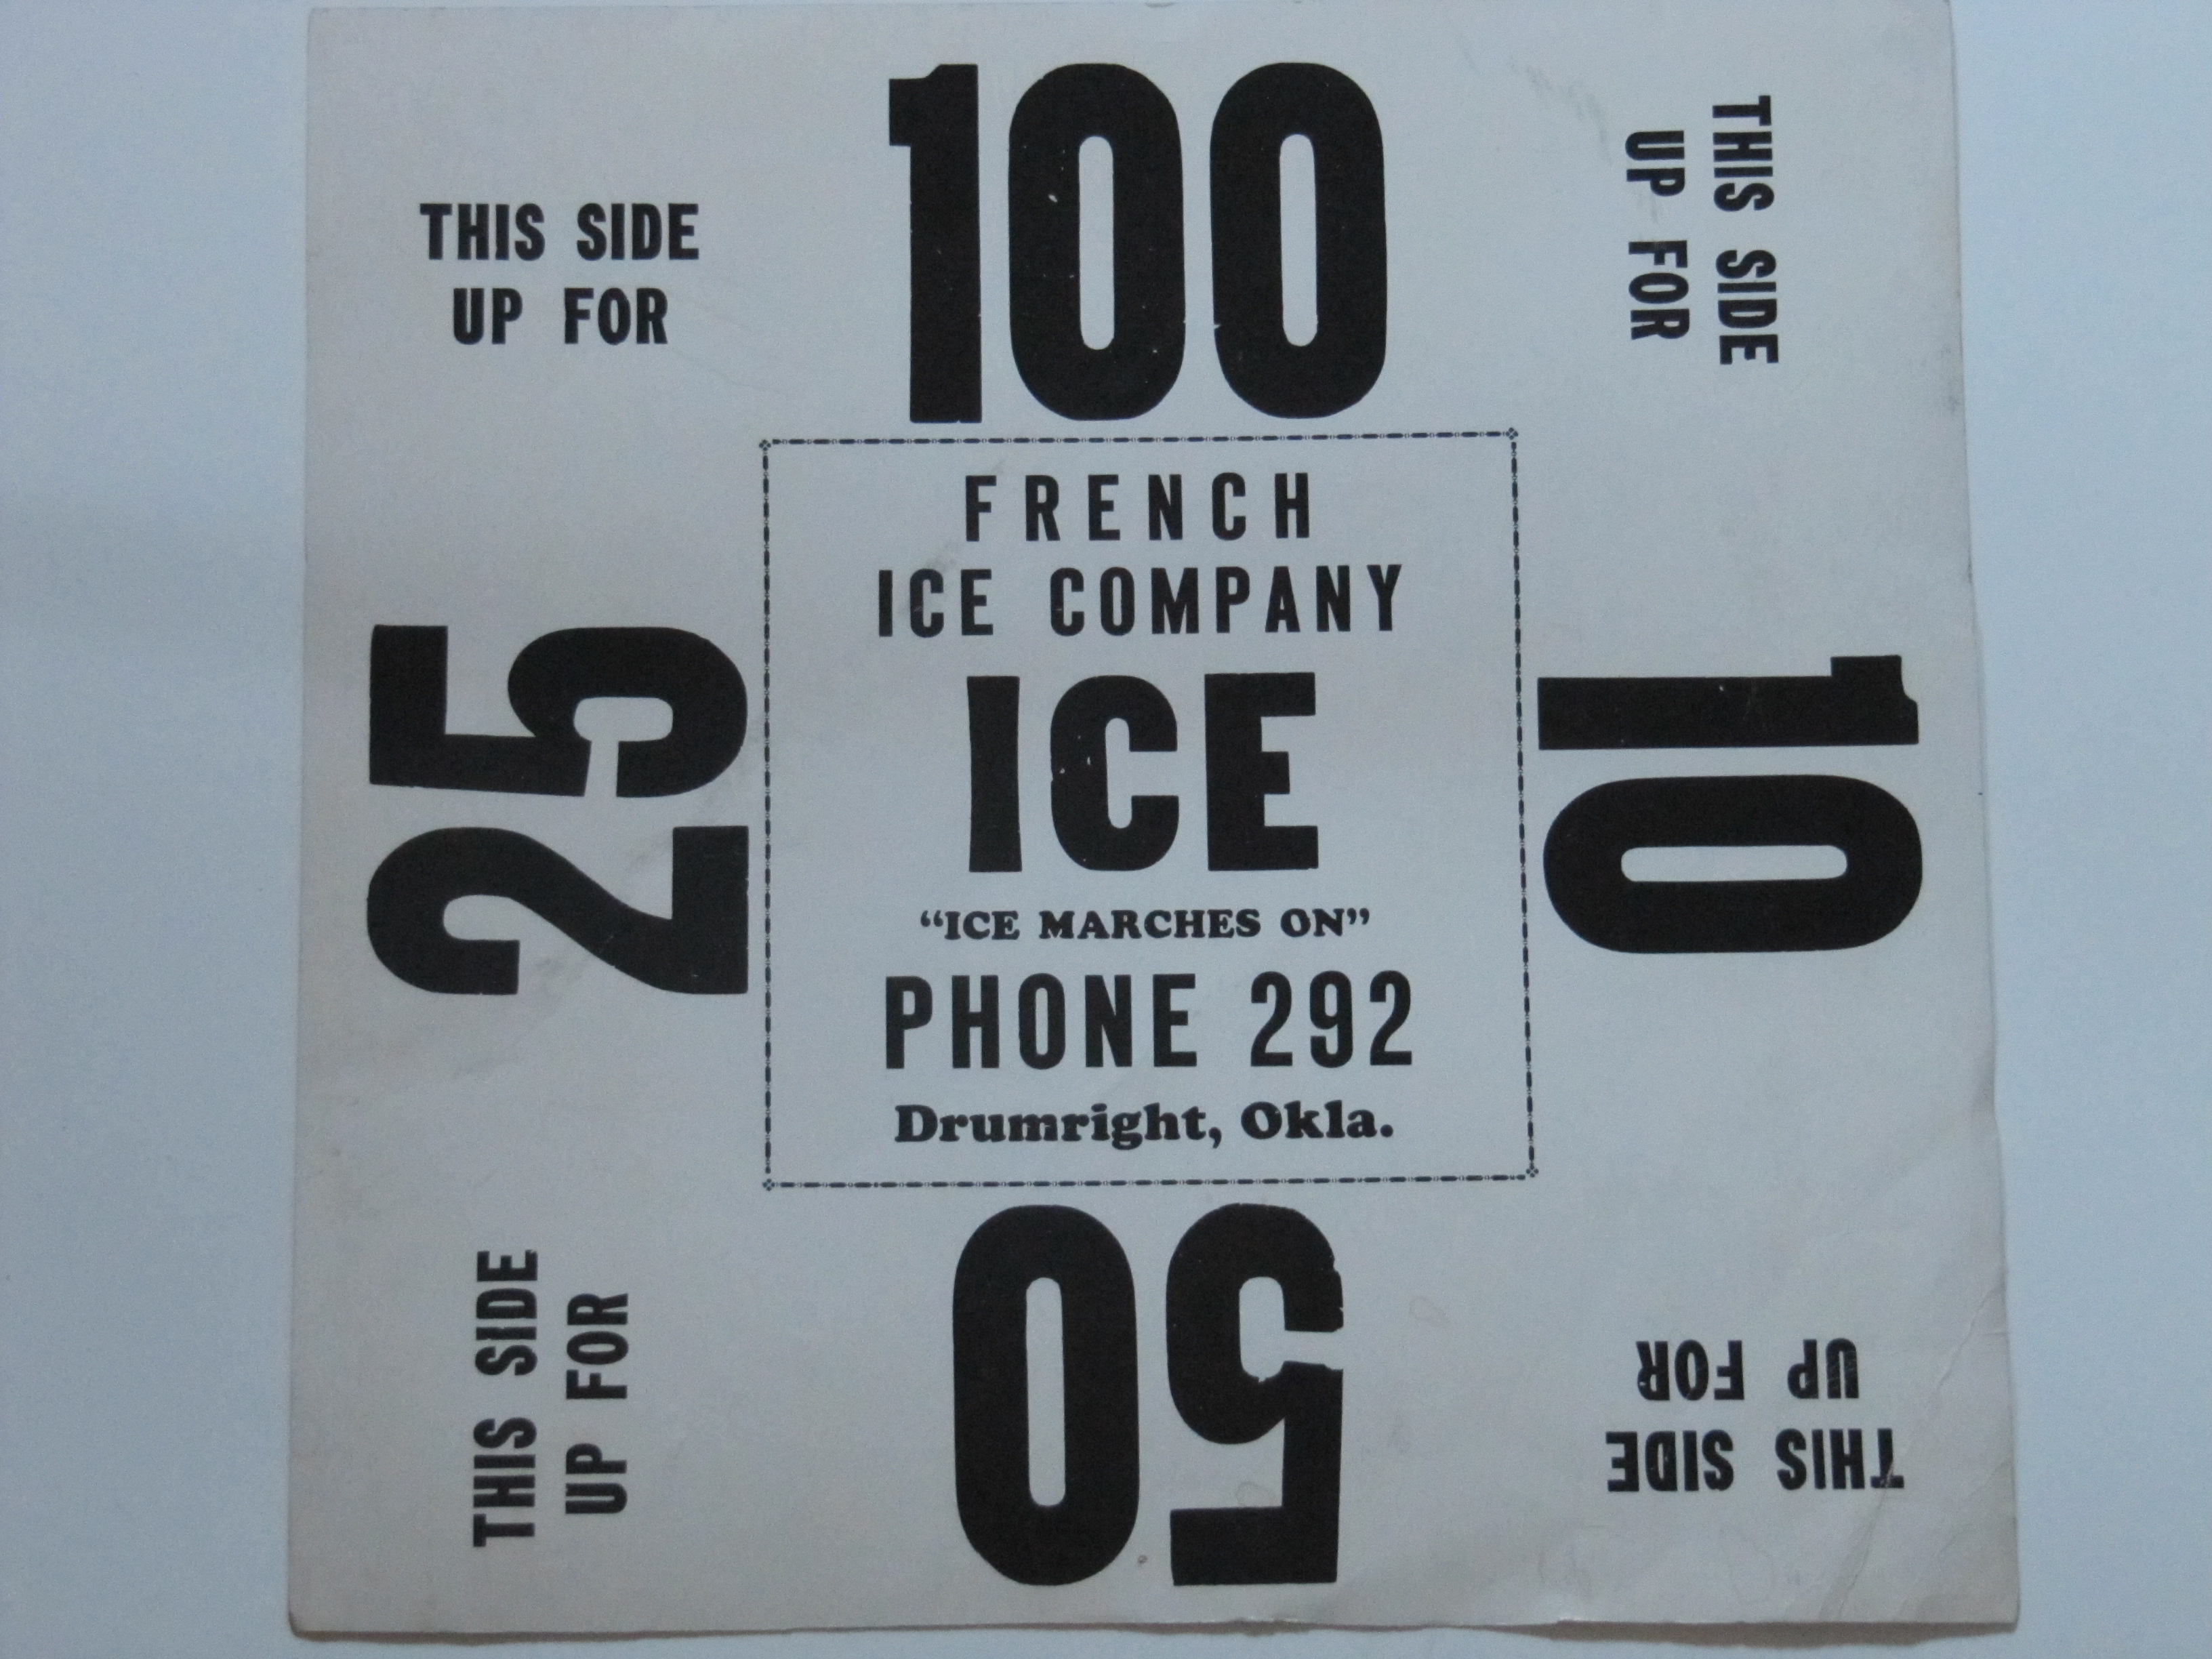 French Ice Co.